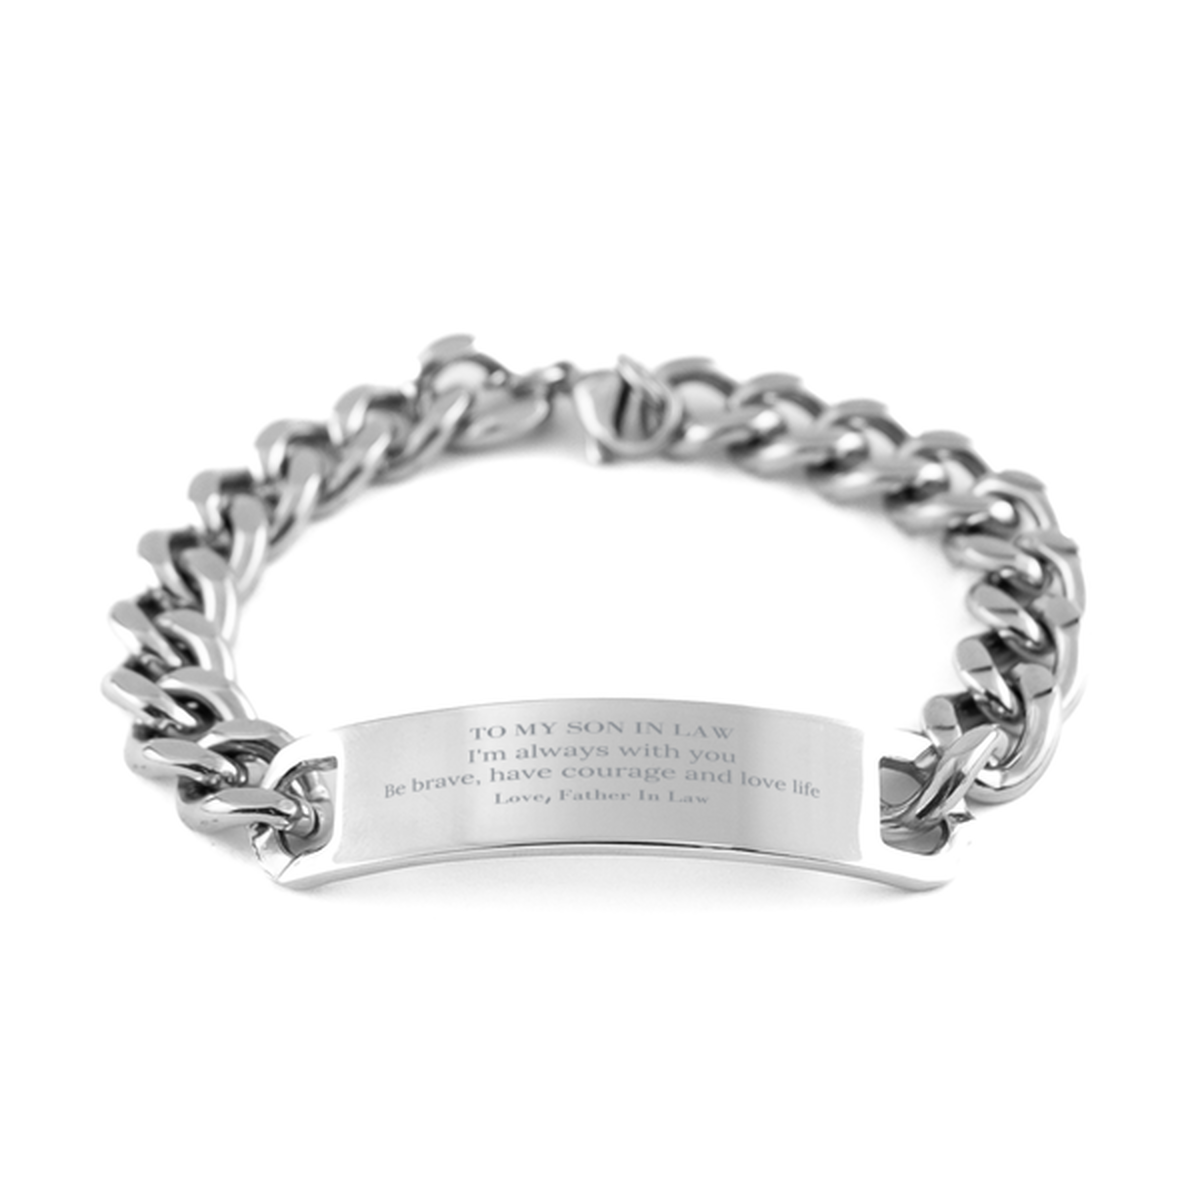 To My Son In Law Gifts from Father In Law, Unique Cuban Chain Stainless Steel Bracelet Inspirational Christmas Birthday Graduation Gifts for Son In Law I'm always with you. Be brave, have courage and love life. Love, Father In Law